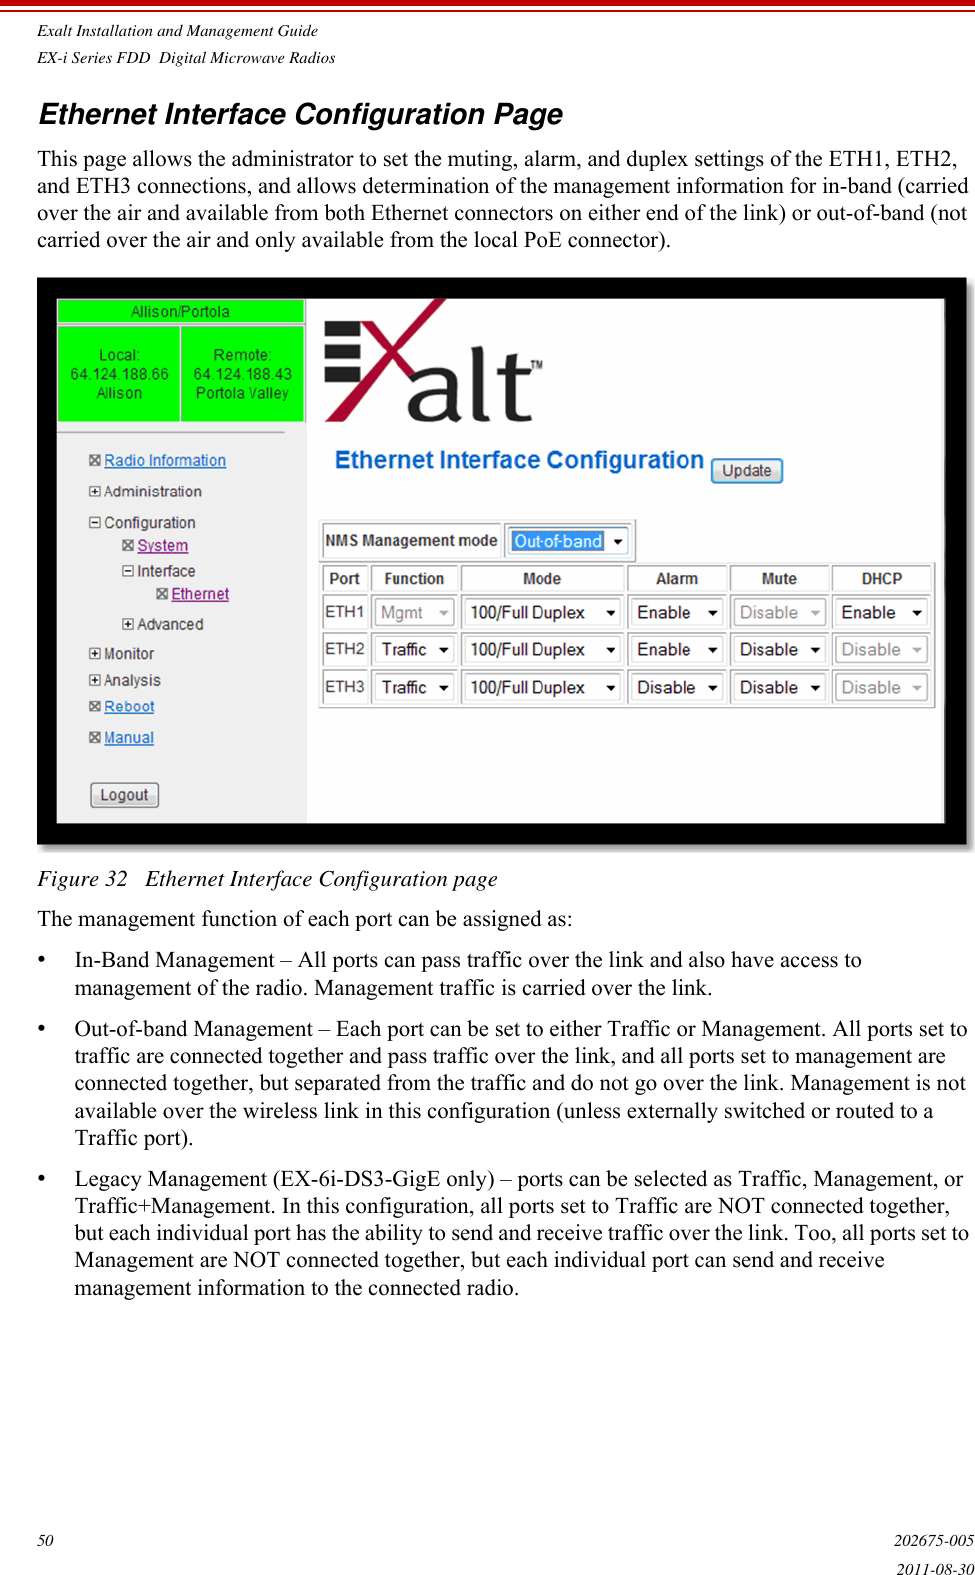 Exalt Installation and Management GuideEX-i Series FDD  Digital Microwave Radios50 202675-0052011-08-30Ethernet Interface Configuration PageThis page allows the administrator to set the muting, alarm, and duplex settings of the ETH1, ETH2, and ETH3 connections, and allows determination of the management information for in-band (carried over the air and available from both Ethernet connectors on either end of the link) or out-of-band (not carried over the air and only available from the local PoE connector).Figure 32   Ethernet Interface Configuration pageThe management function of each port can be assigned as:•In-Band Management – All ports can pass traffic over the link and also have access to management of the radio. Management traffic is carried over the link. •Out-of-band Management – Each port can be set to either Traffic or Management. All ports set to traffic are connected together and pass traffic over the link, and all ports set to management are connected together, but separated from the traffic and do not go over the link. Management is not available over the wireless link in this configuration (unless externally switched or routed to a Traffic port).•Legacy Management (EX-6i-DS3-GigE only) – ports can be selected as Traffic, Management, or Traffic+Management. In this configuration, all ports set to Traffic are NOT connected together, but each individual port has the ability to send and receive traffic over the link. Too, all ports set to Management are NOT connected together, but each individual port can send and receive management information to the connected radio.